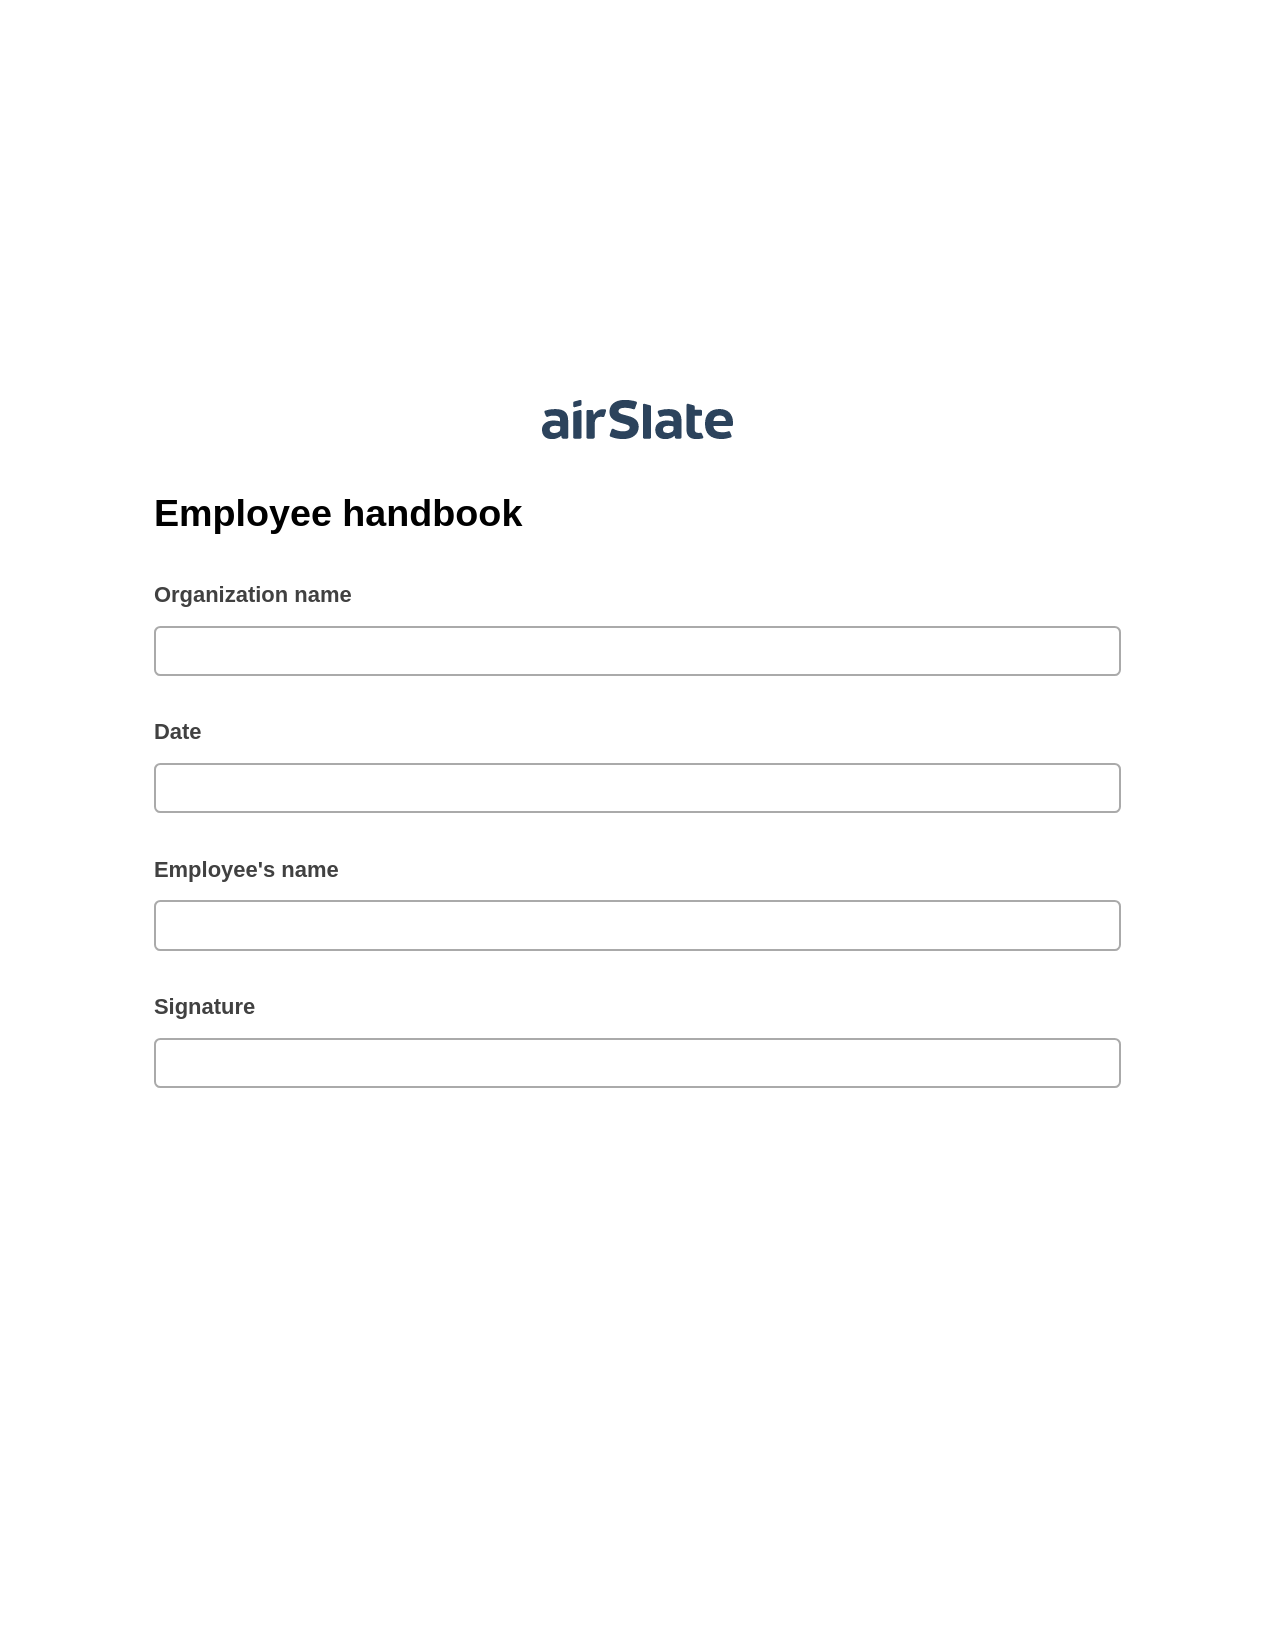 Employee handbook Pre-fill from CSV File Bot, Add Tags to Slate Bot, Export to Excel 365 Bot